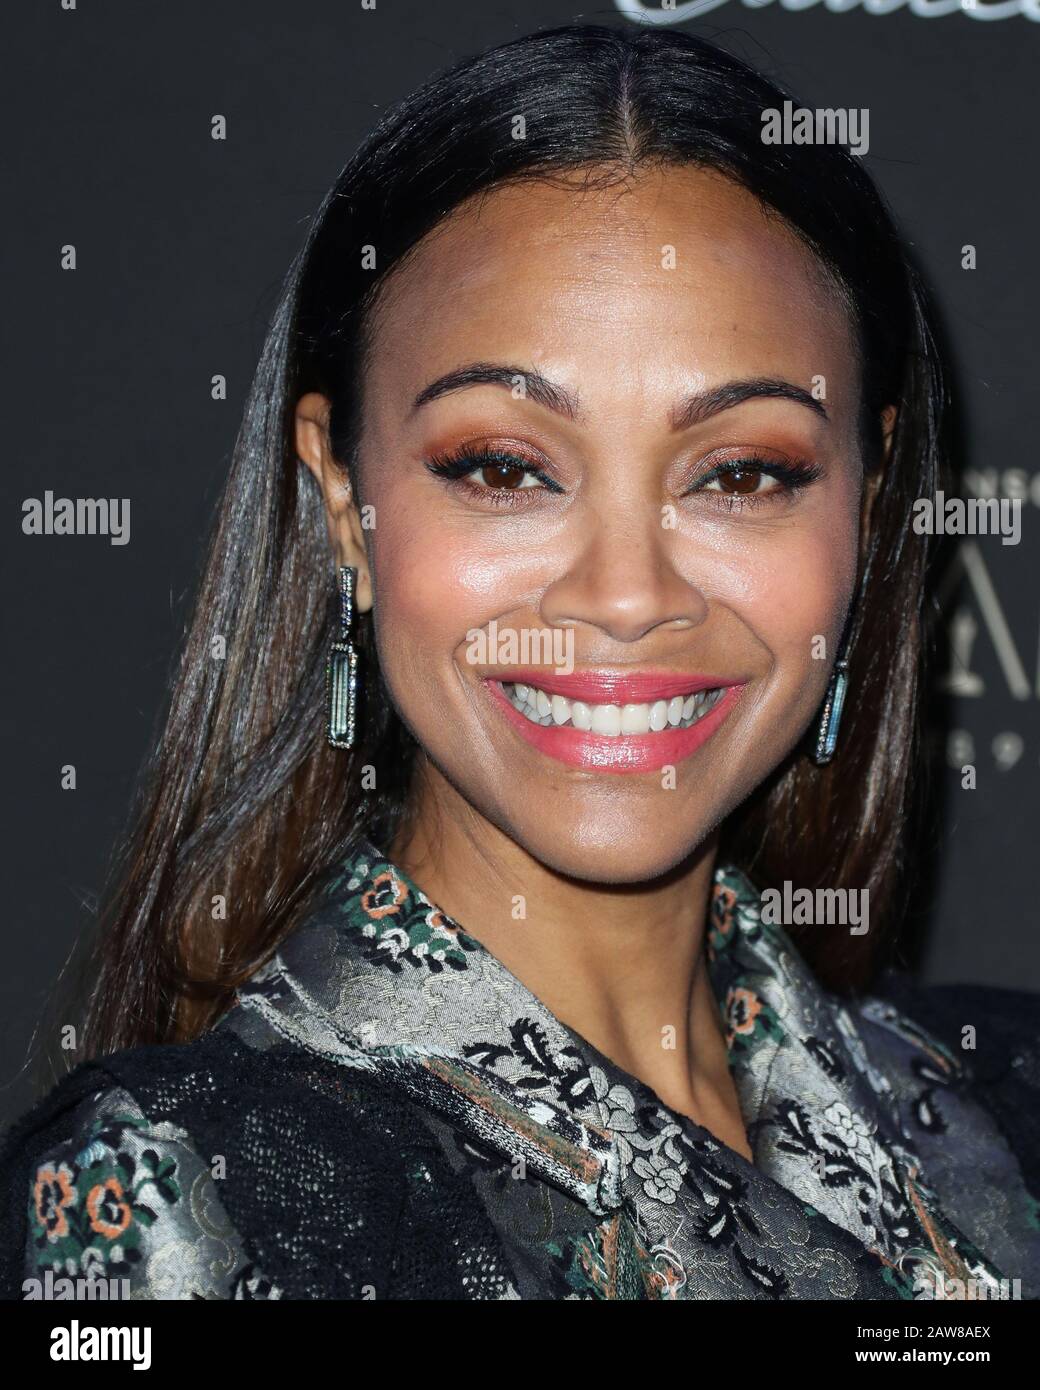 West Hollywood, United States. 06th Feb, 2020. WEST HOLLYWOOD, LOS ANGELES, CALIFORNIA, USA - FEBRUARY 06: Actress Zoe Saldana arrives at the Cadillac Oscar Celebration 2020 held at Chateau Marmont on February 6, 2020 in West Hollywood, Los Angeles, California, United States. (Photo by Xavier Collin/Image Press Agency) Credit: Image Press Agency/Alamy Live News Stock Photo